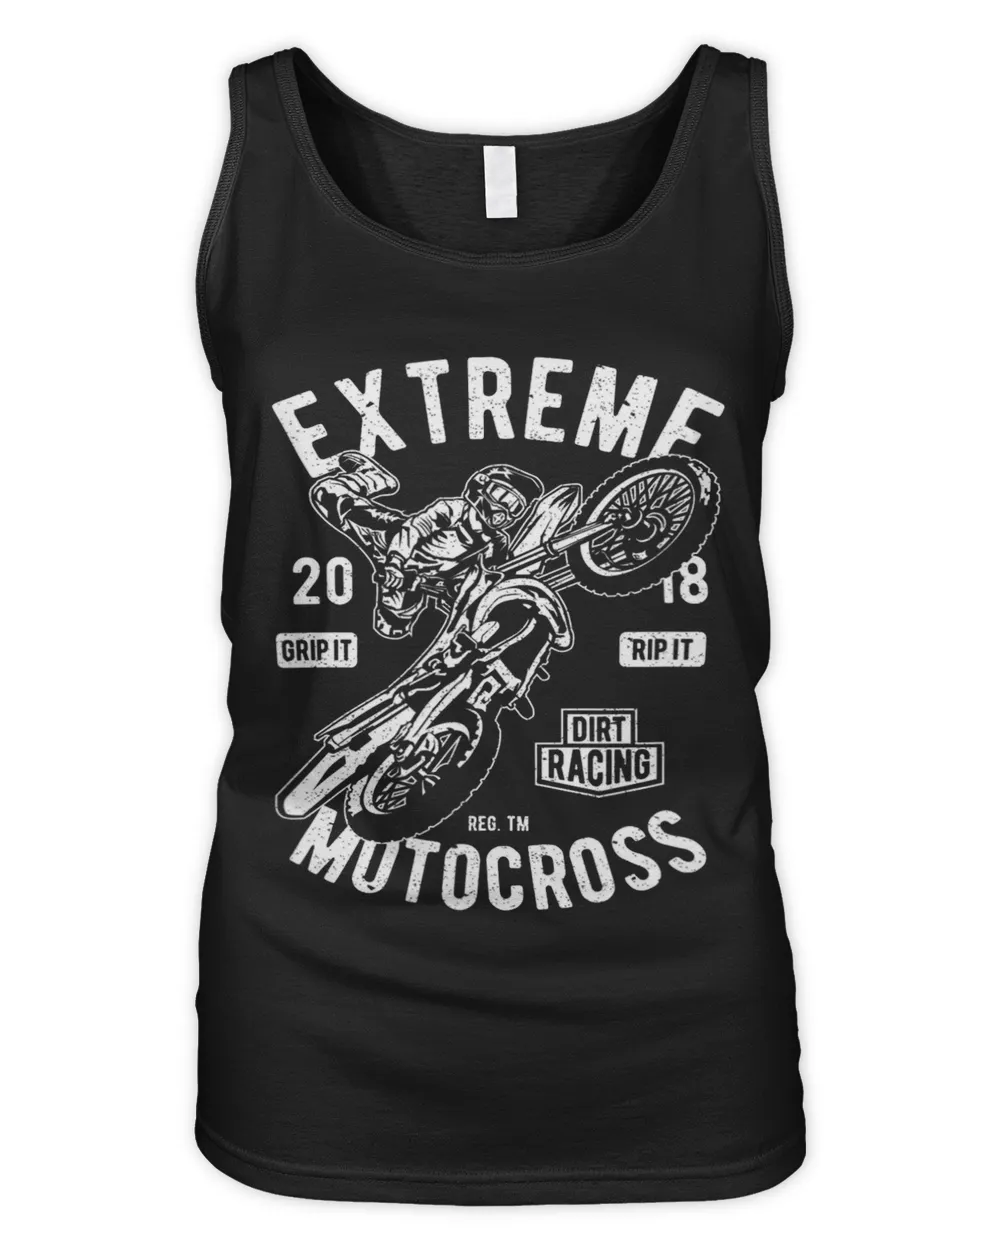 Extreme Motocross motorcyclists and bikers